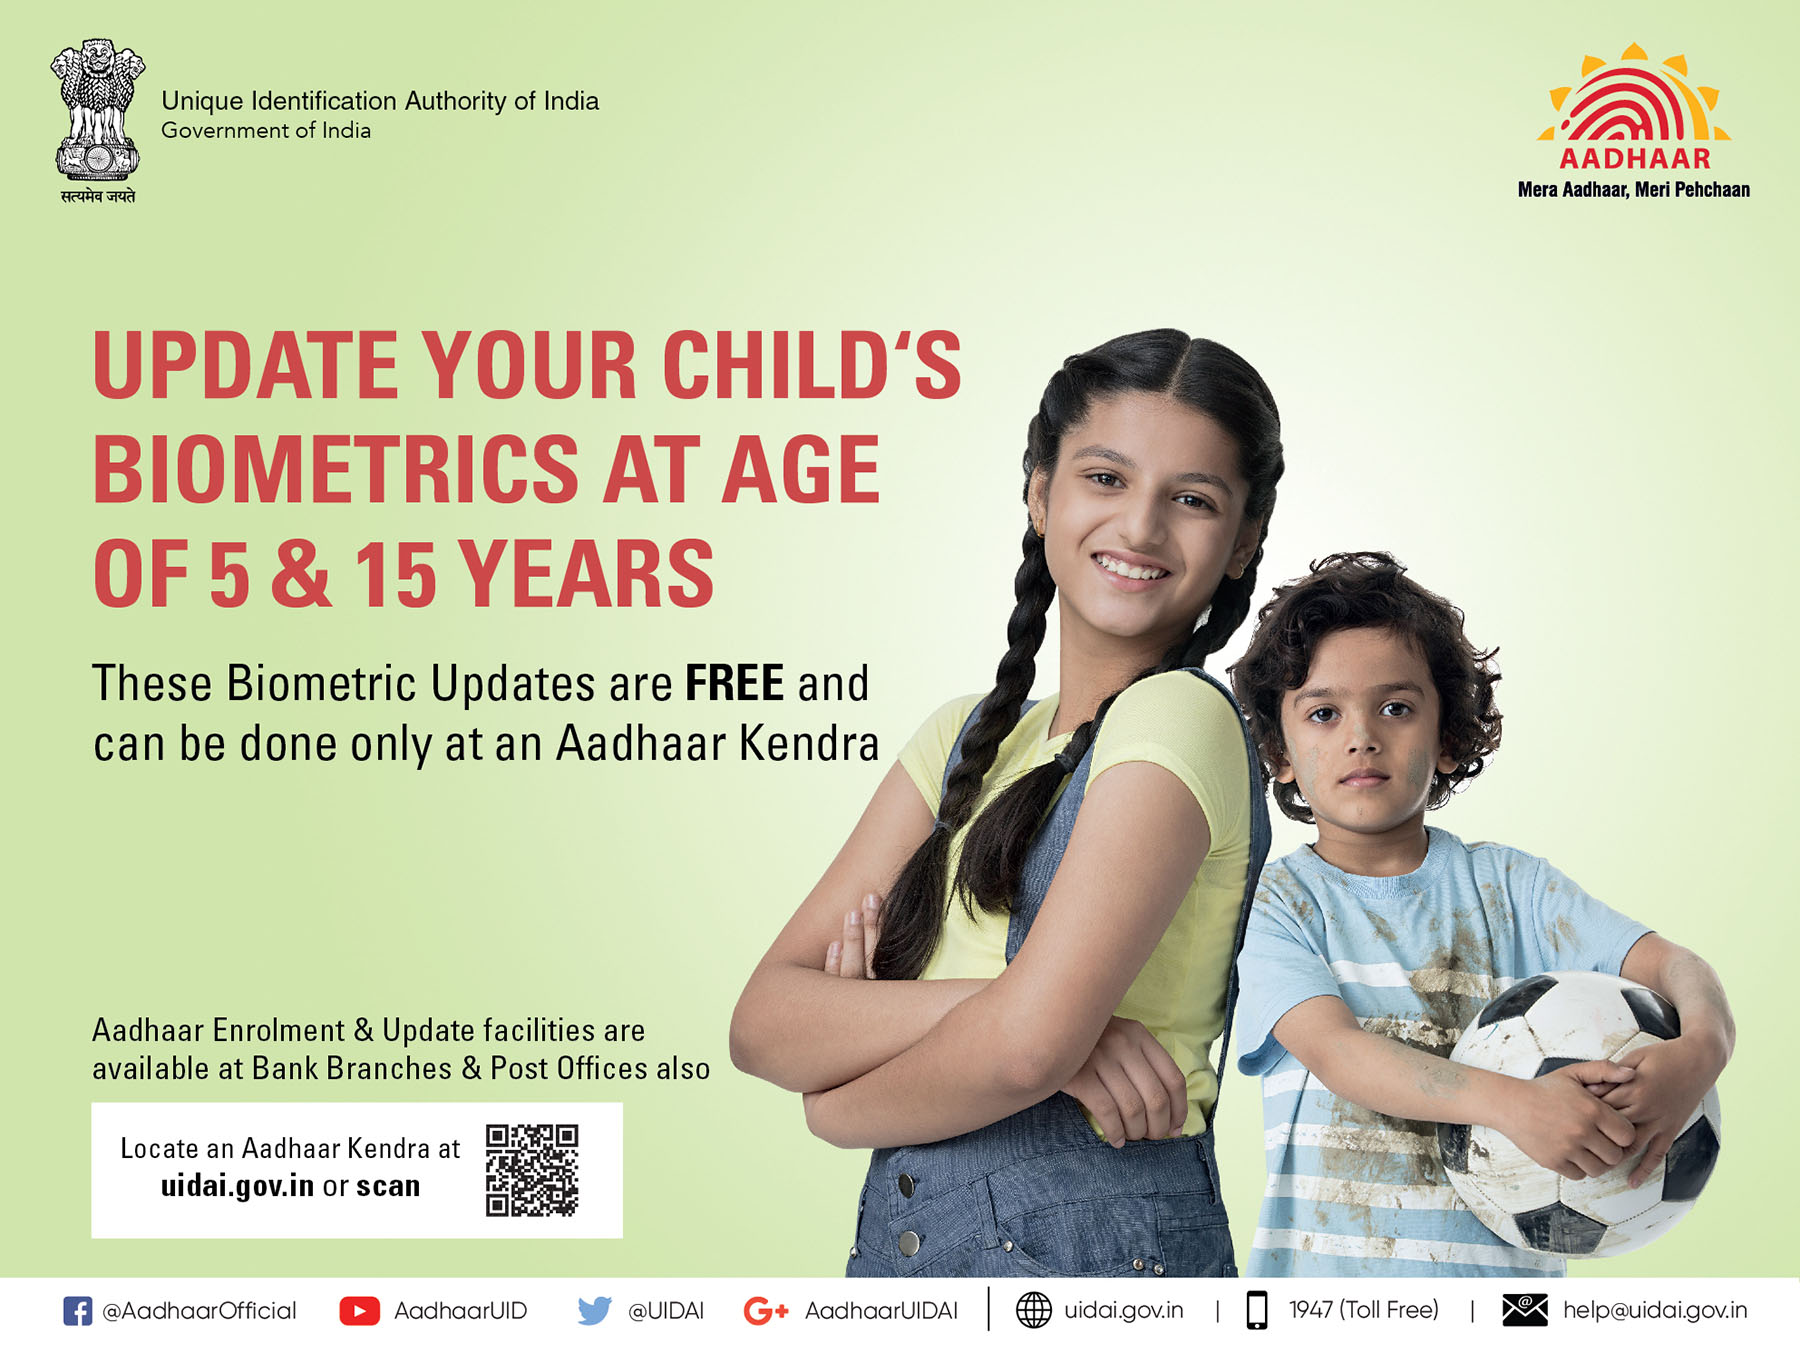 Update your child's 5 and 15 year old biometrics.